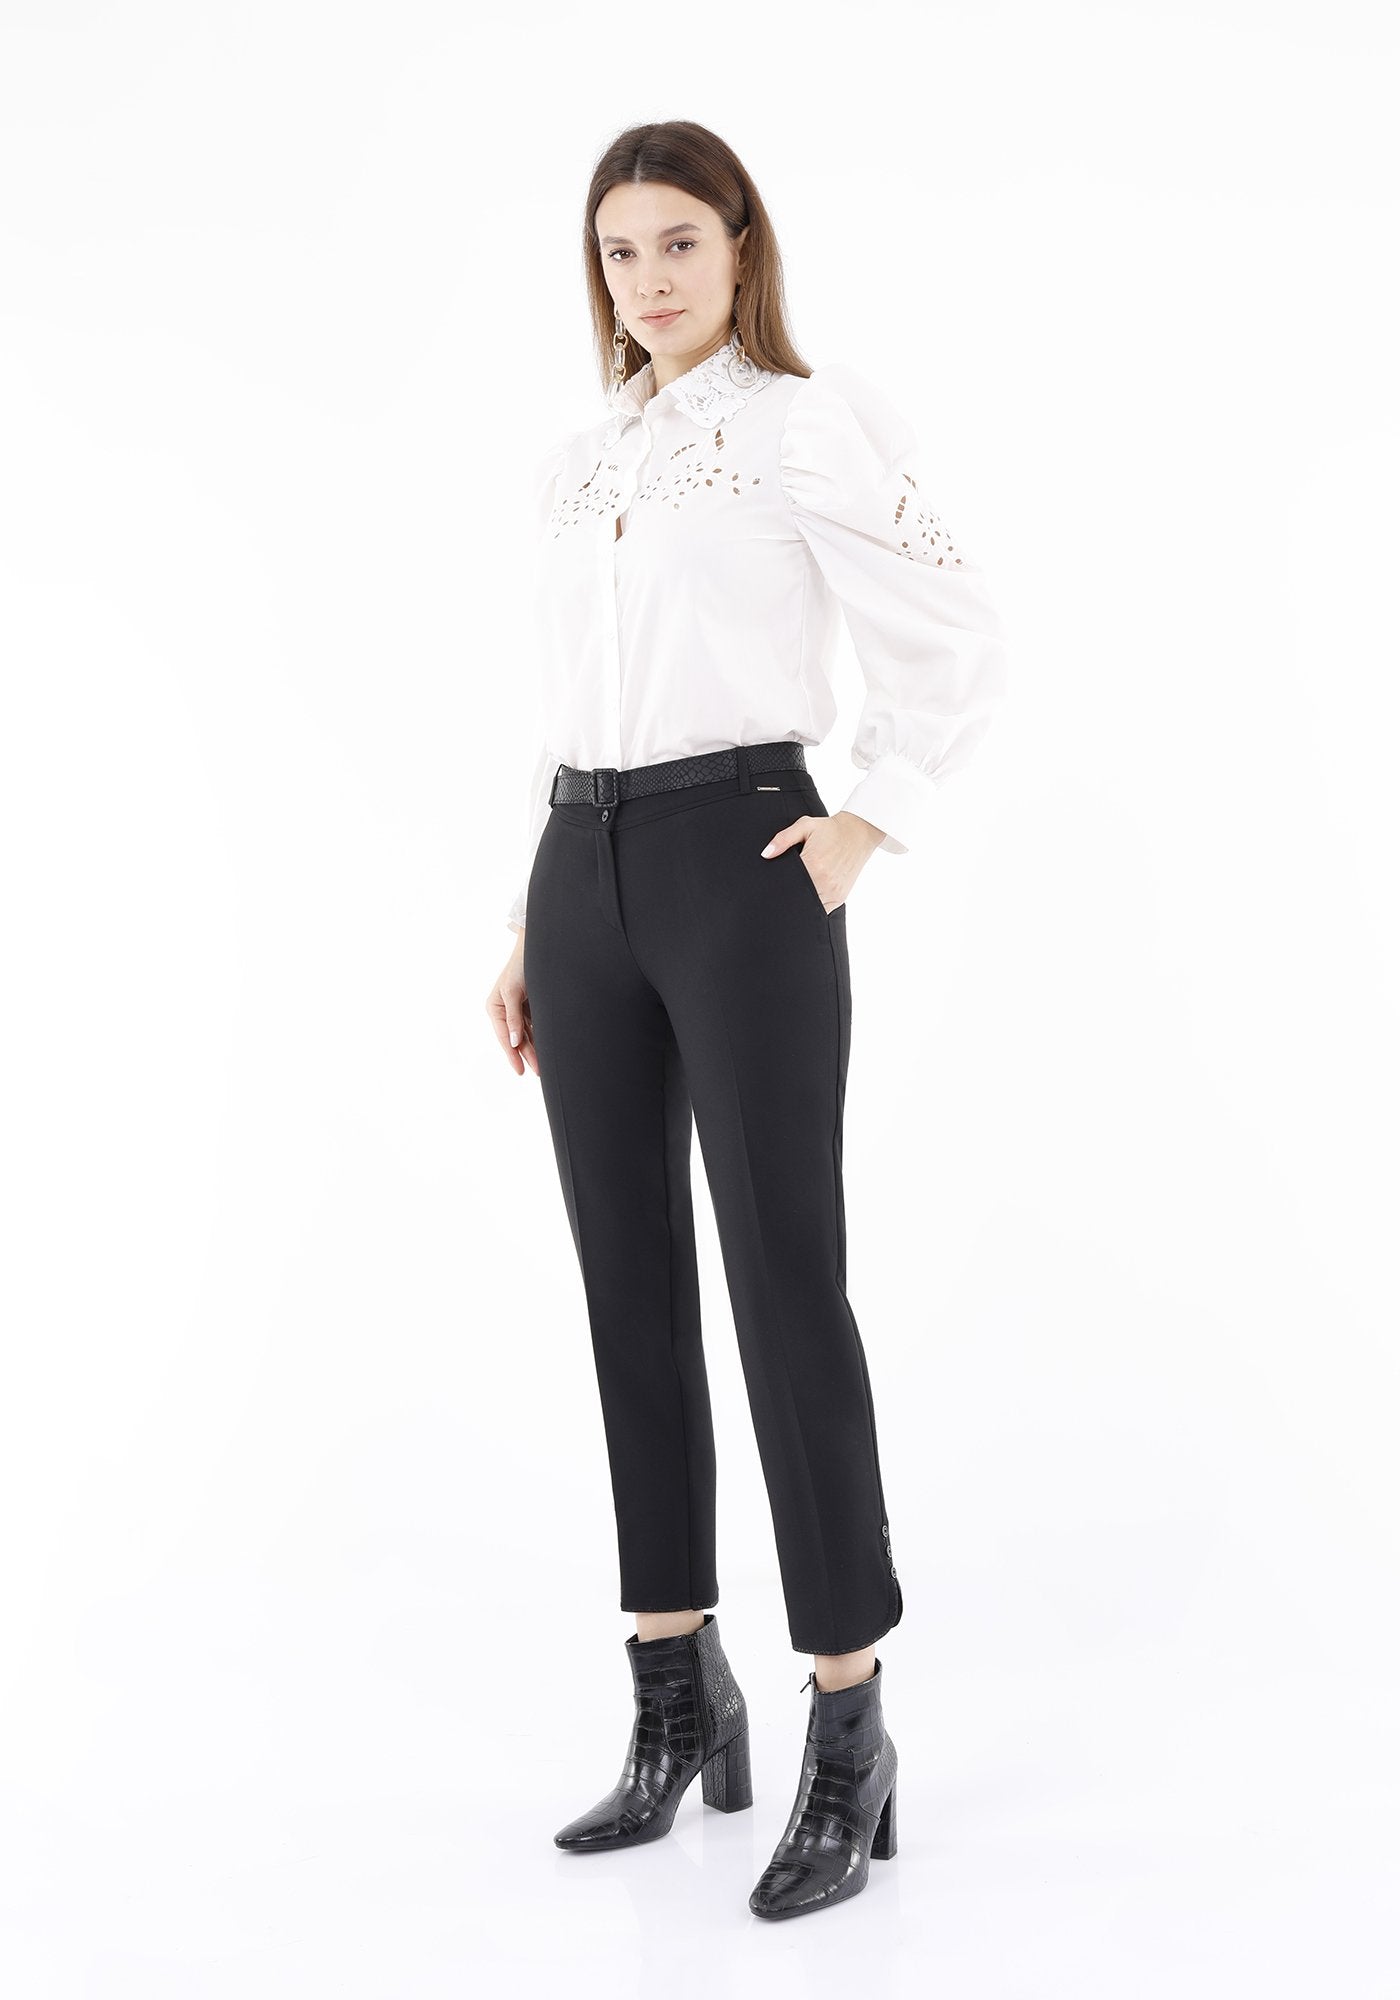 Guzella Black Slim Fit Ankle Length Women's Pants with Buttons and Leather Details Guzella